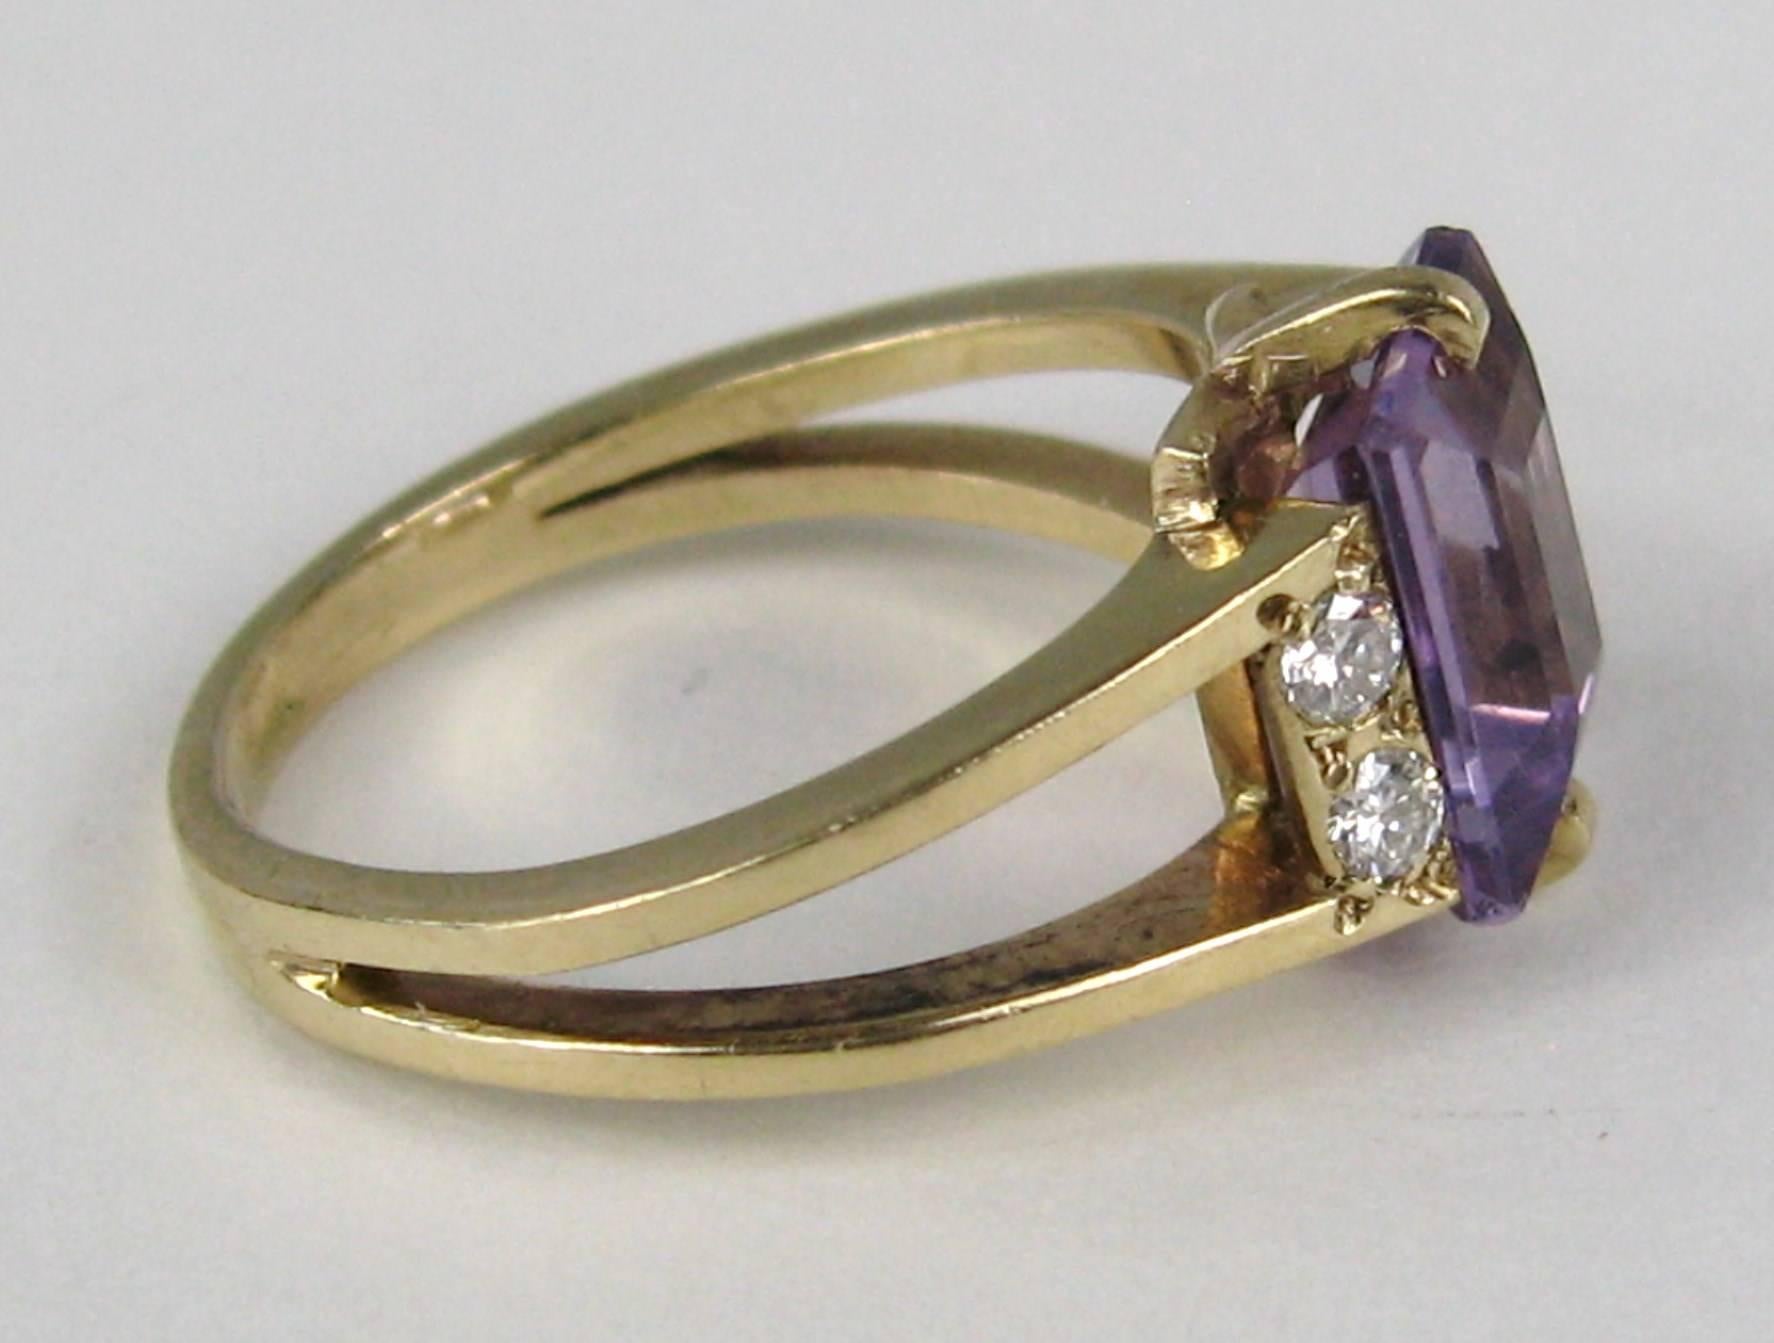 Sleek Modern Amethyst and Diamond Ring. Prong set Amethyst Emerald-cut stone flanked by 2 Diamonds on each side. The ring is a size a 8.5 and can be sized by us or your jeweler. Be sure to check our storefront for more fabulous pieces from this